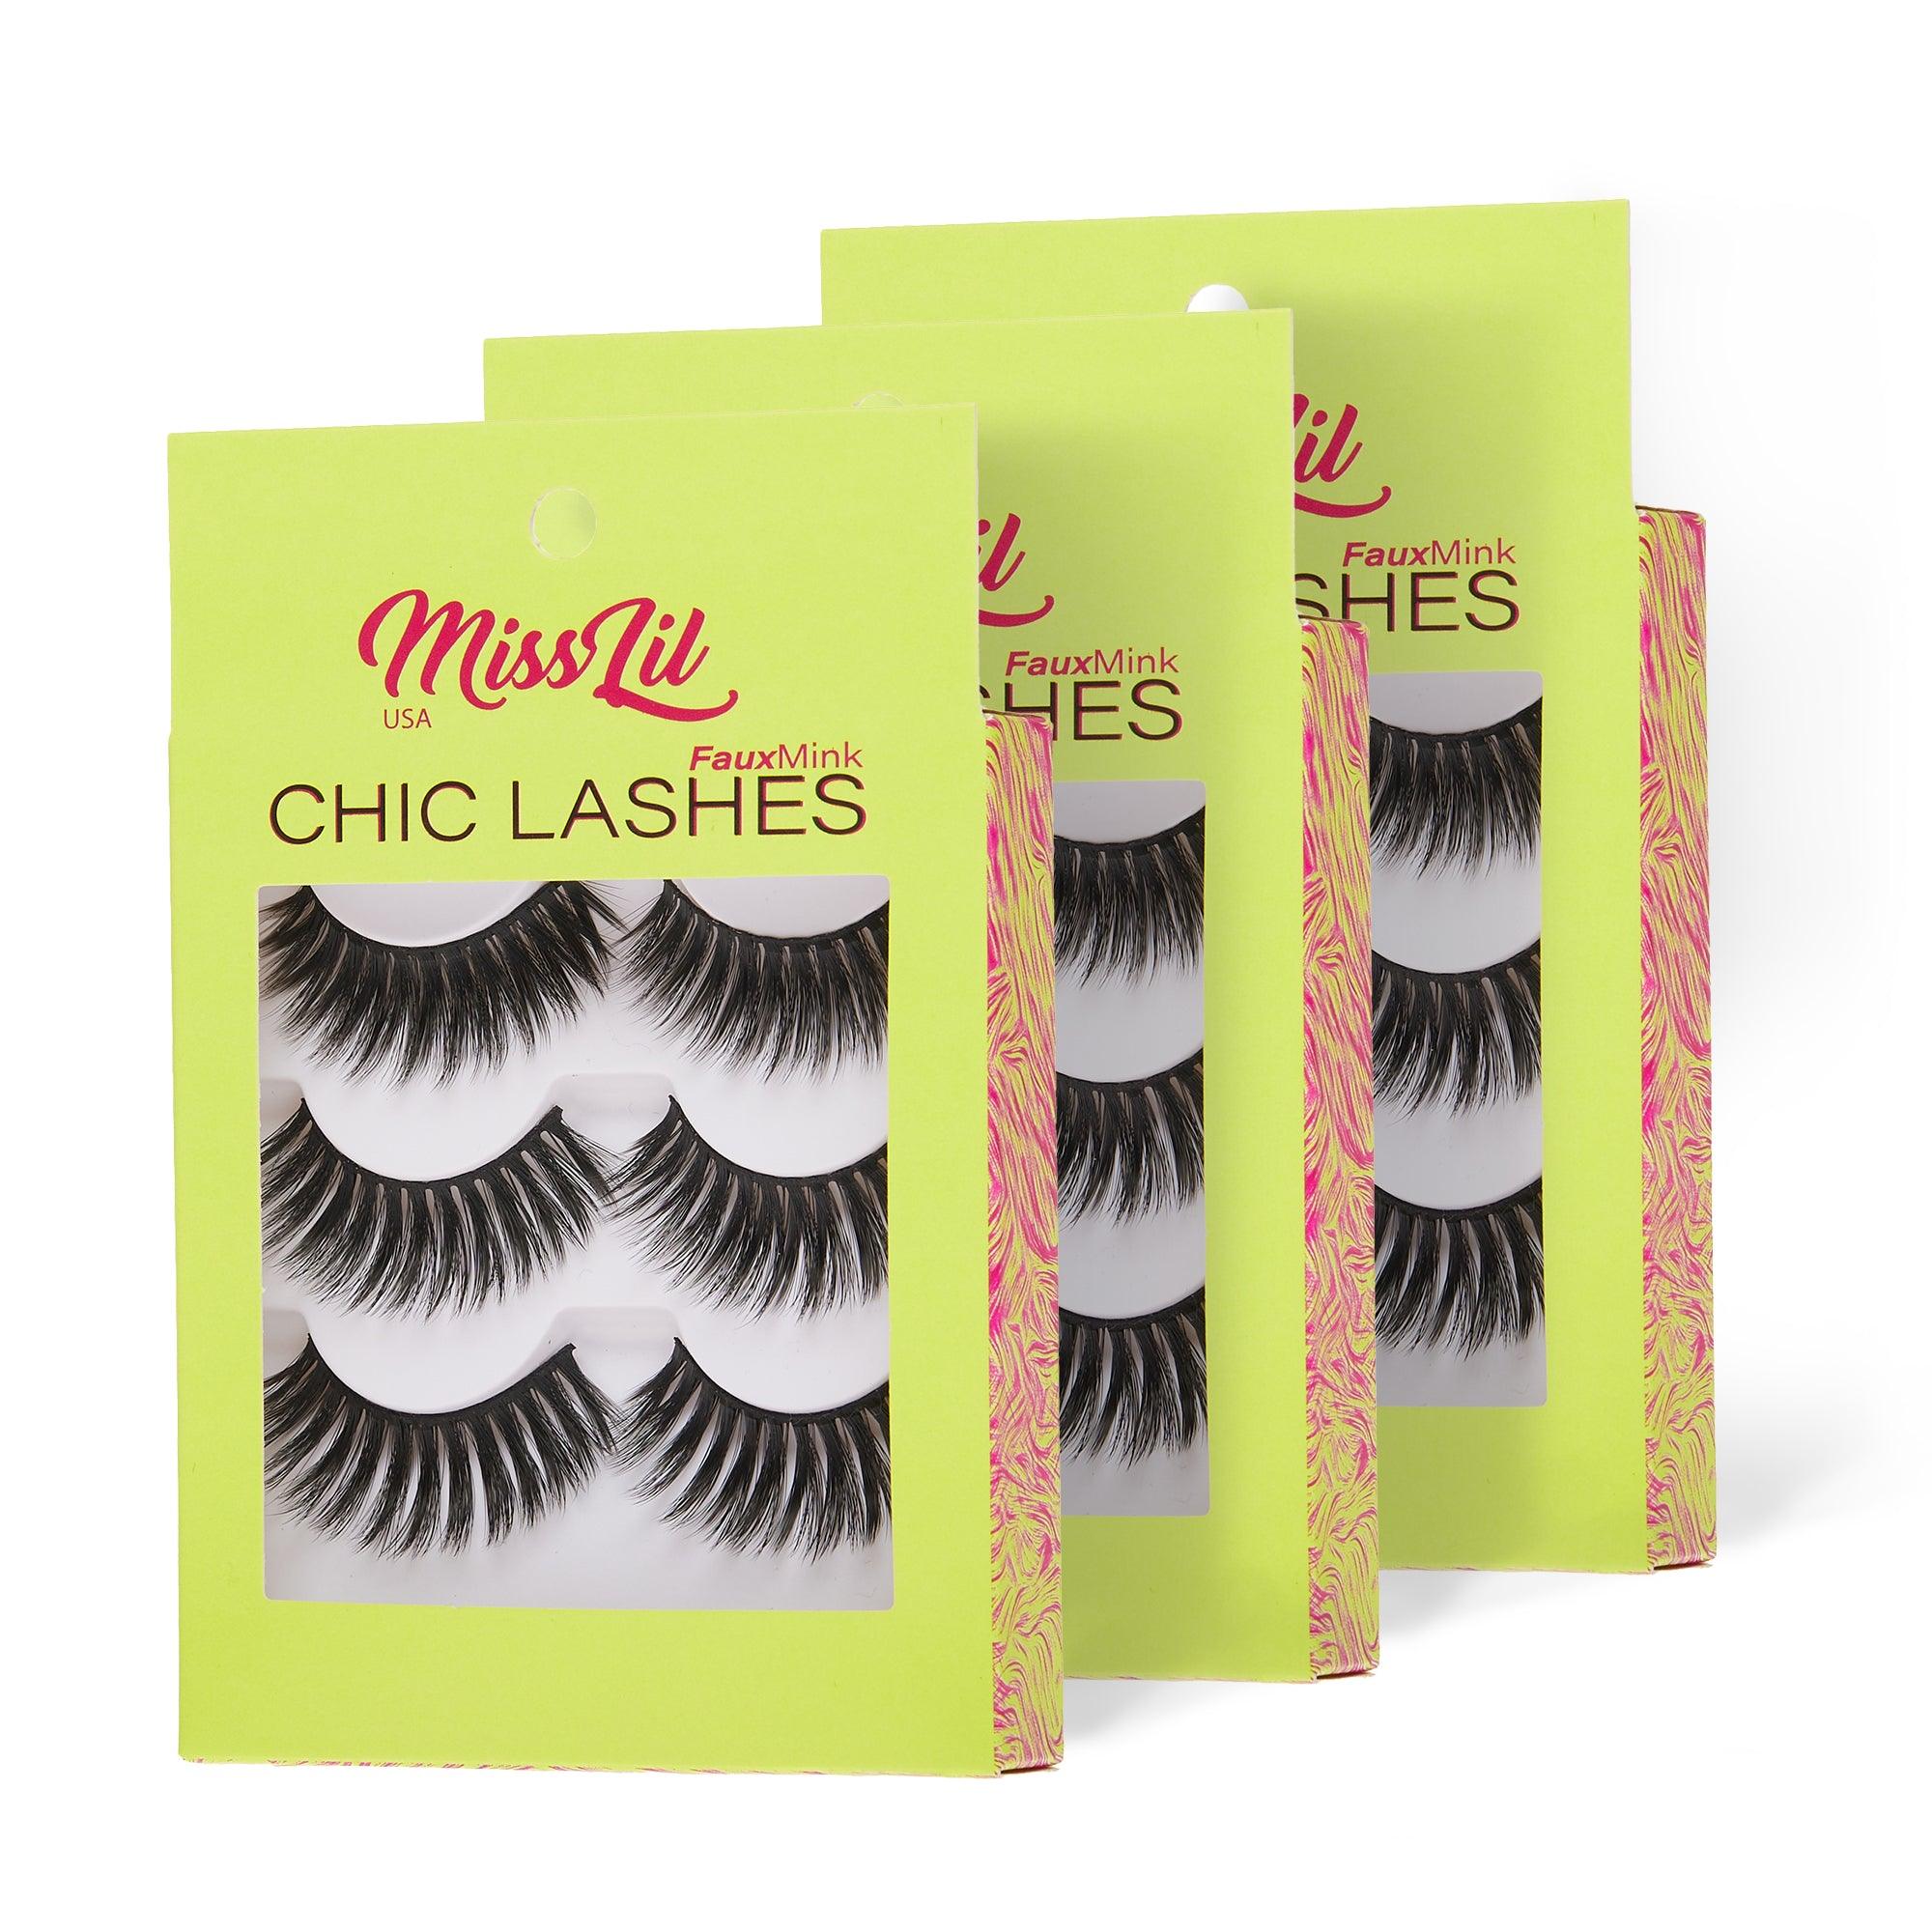 3-Pair Faux Mink Eyelashes - Chic Lashes Collection #21 - Pack of 3 - Miss Lil USA